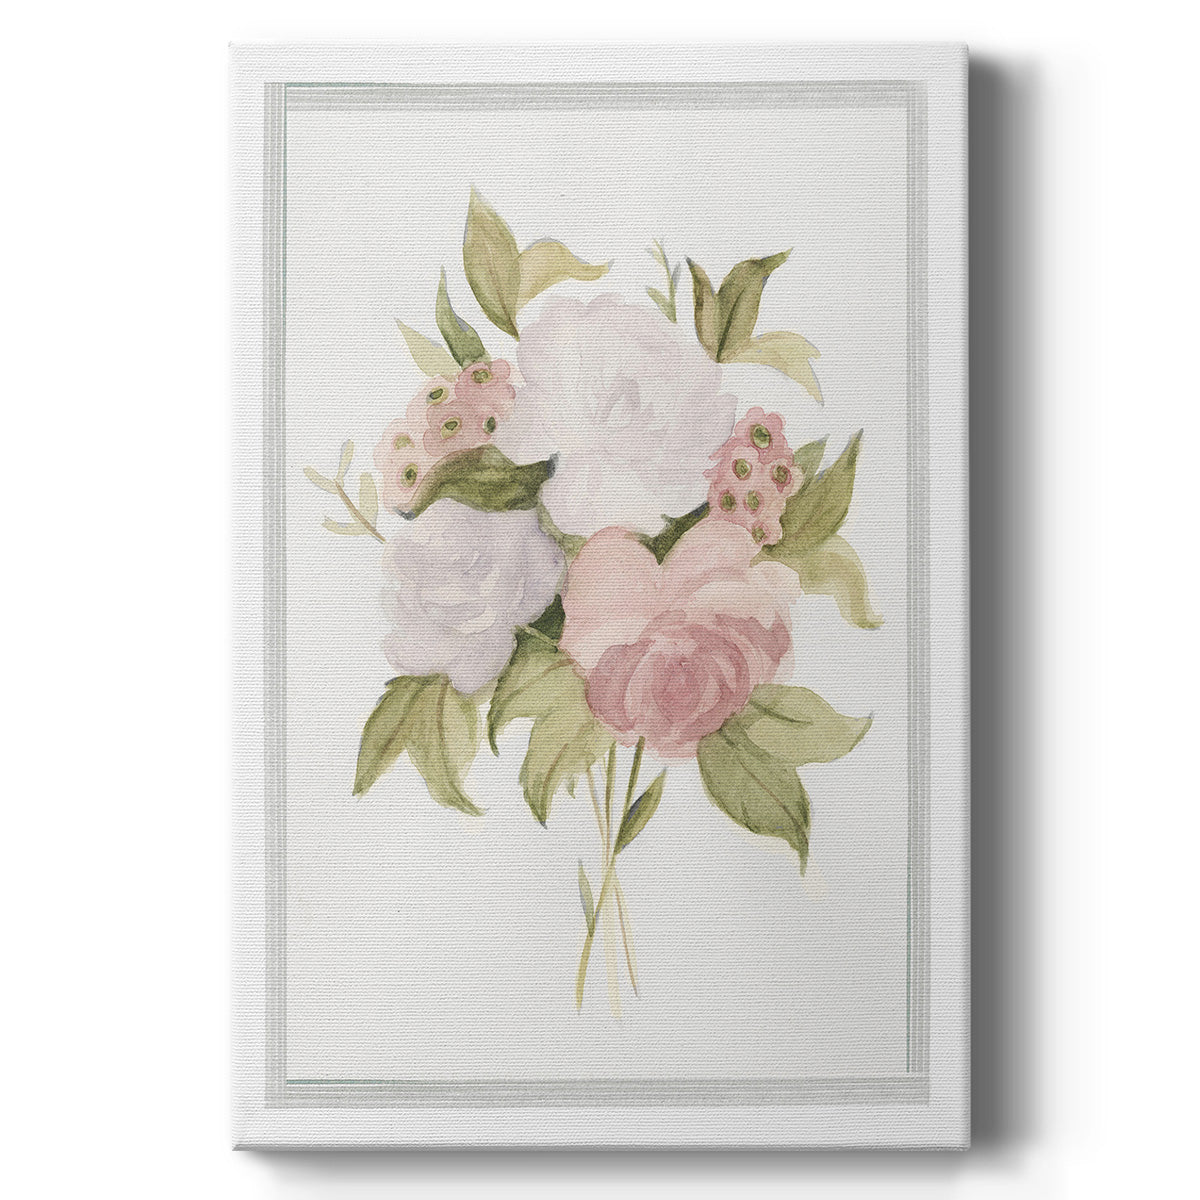 UA CH Soft Bouquet I Premium Gallery Wrapped Canvas - Ready to Hang